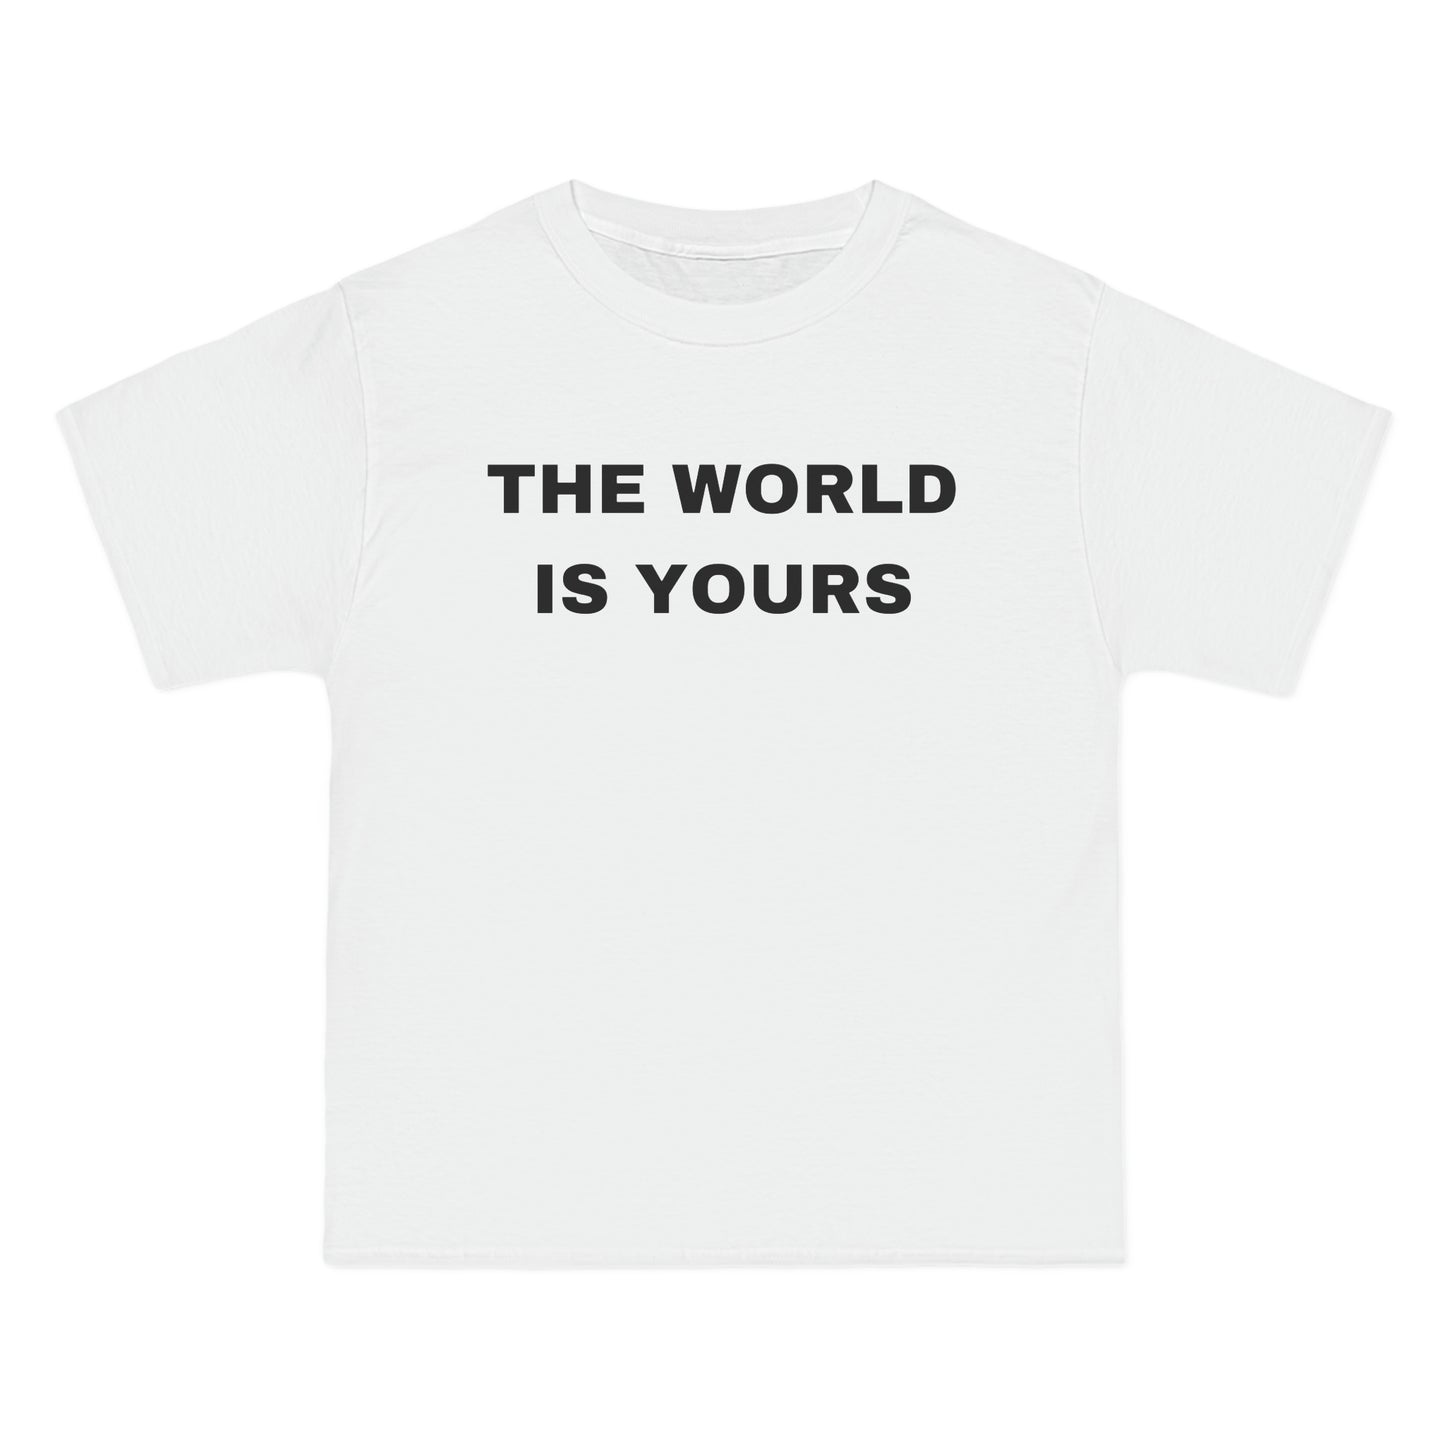 THE WORLD IS YOURS Tee